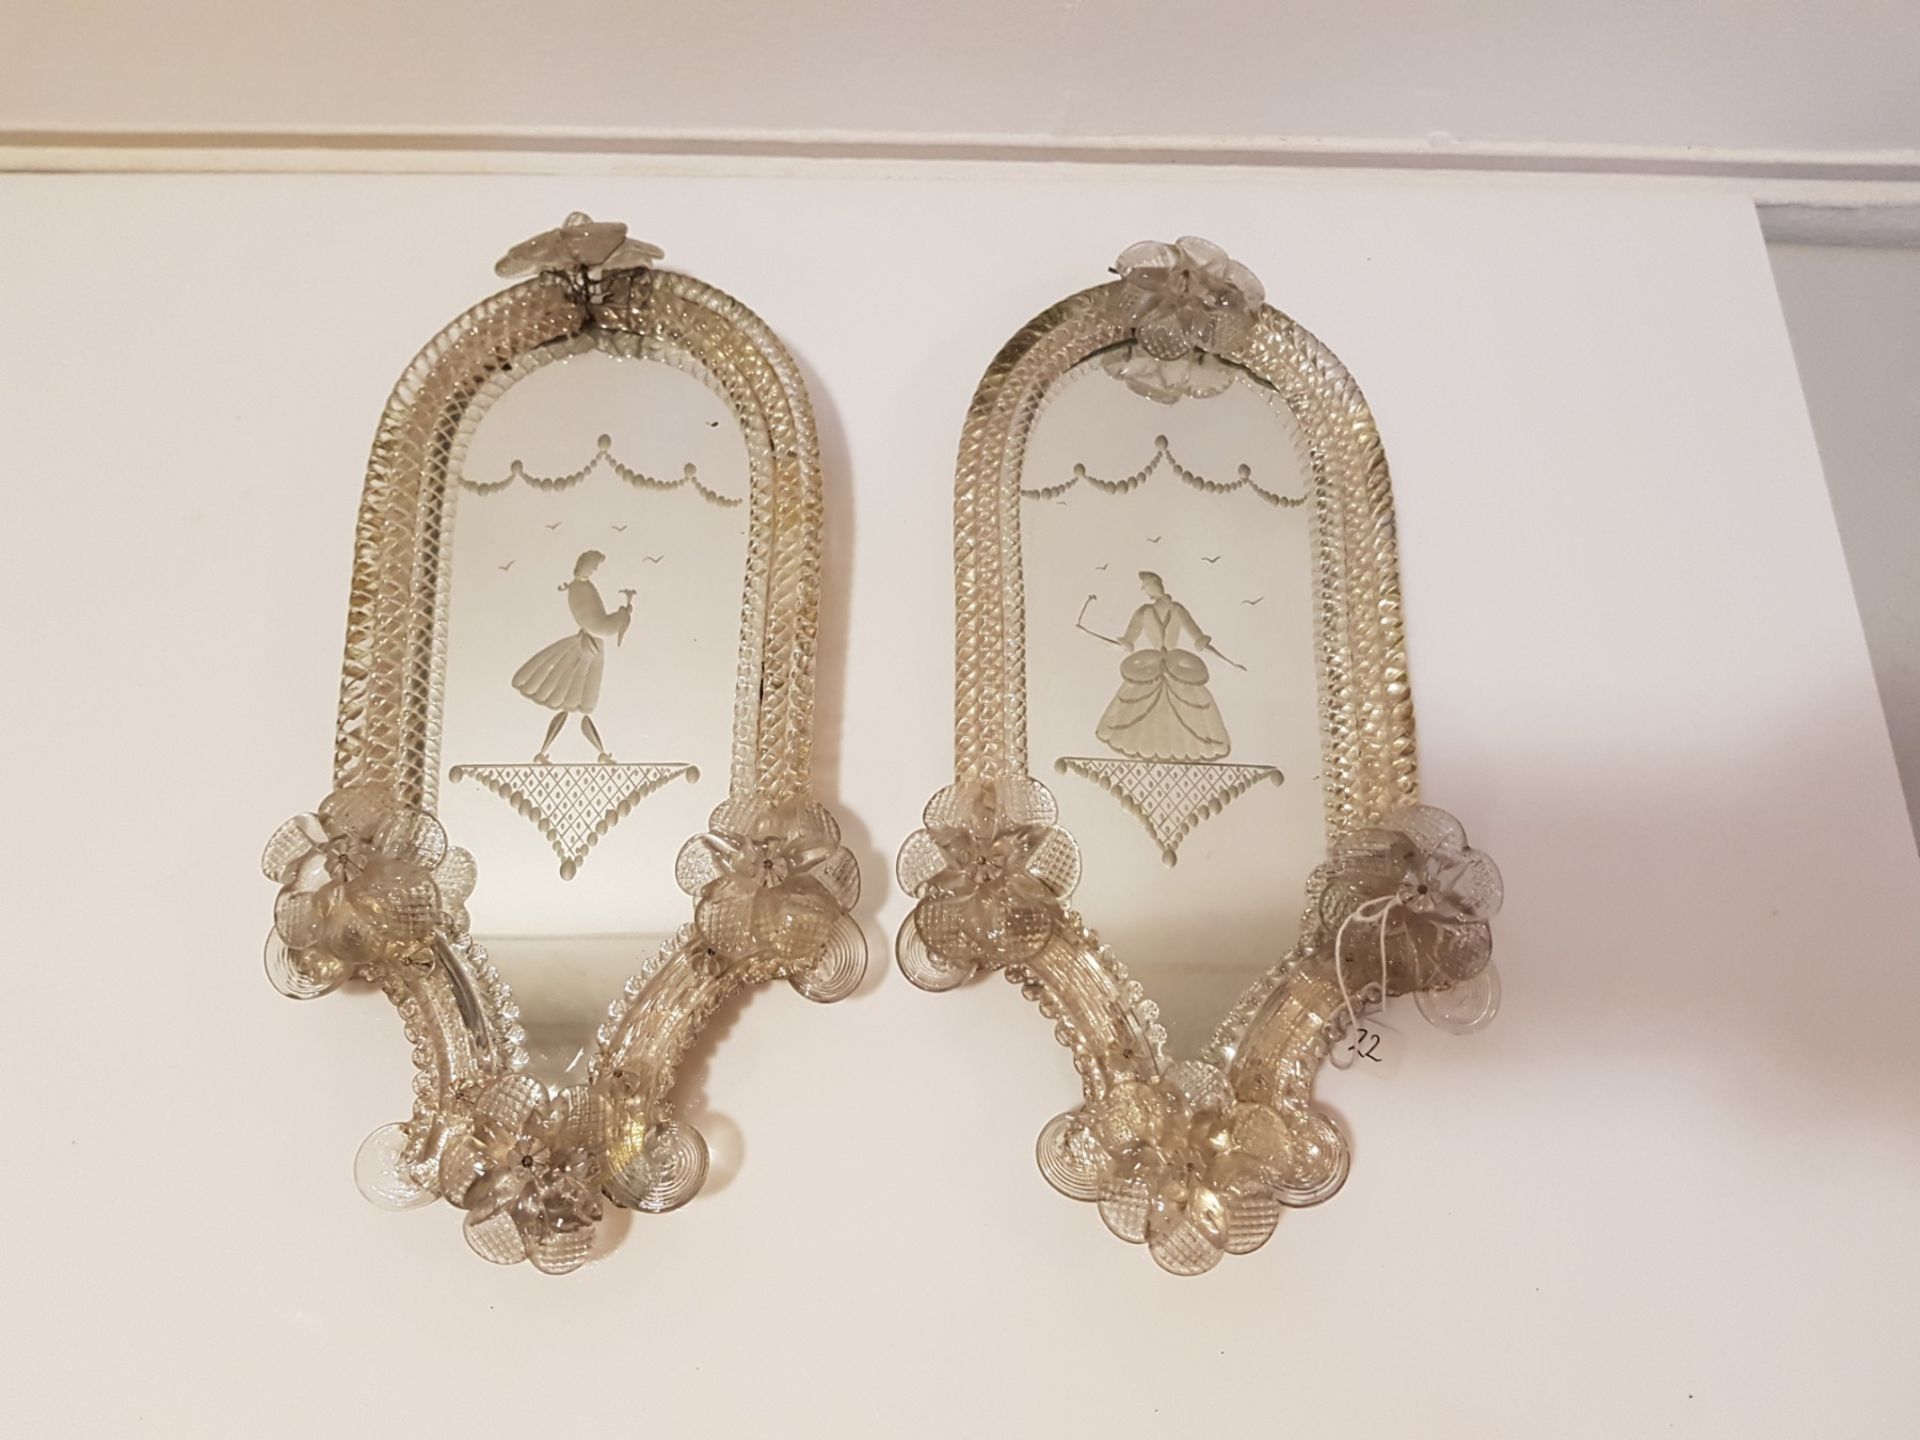 A pair of 20th century wall decorations